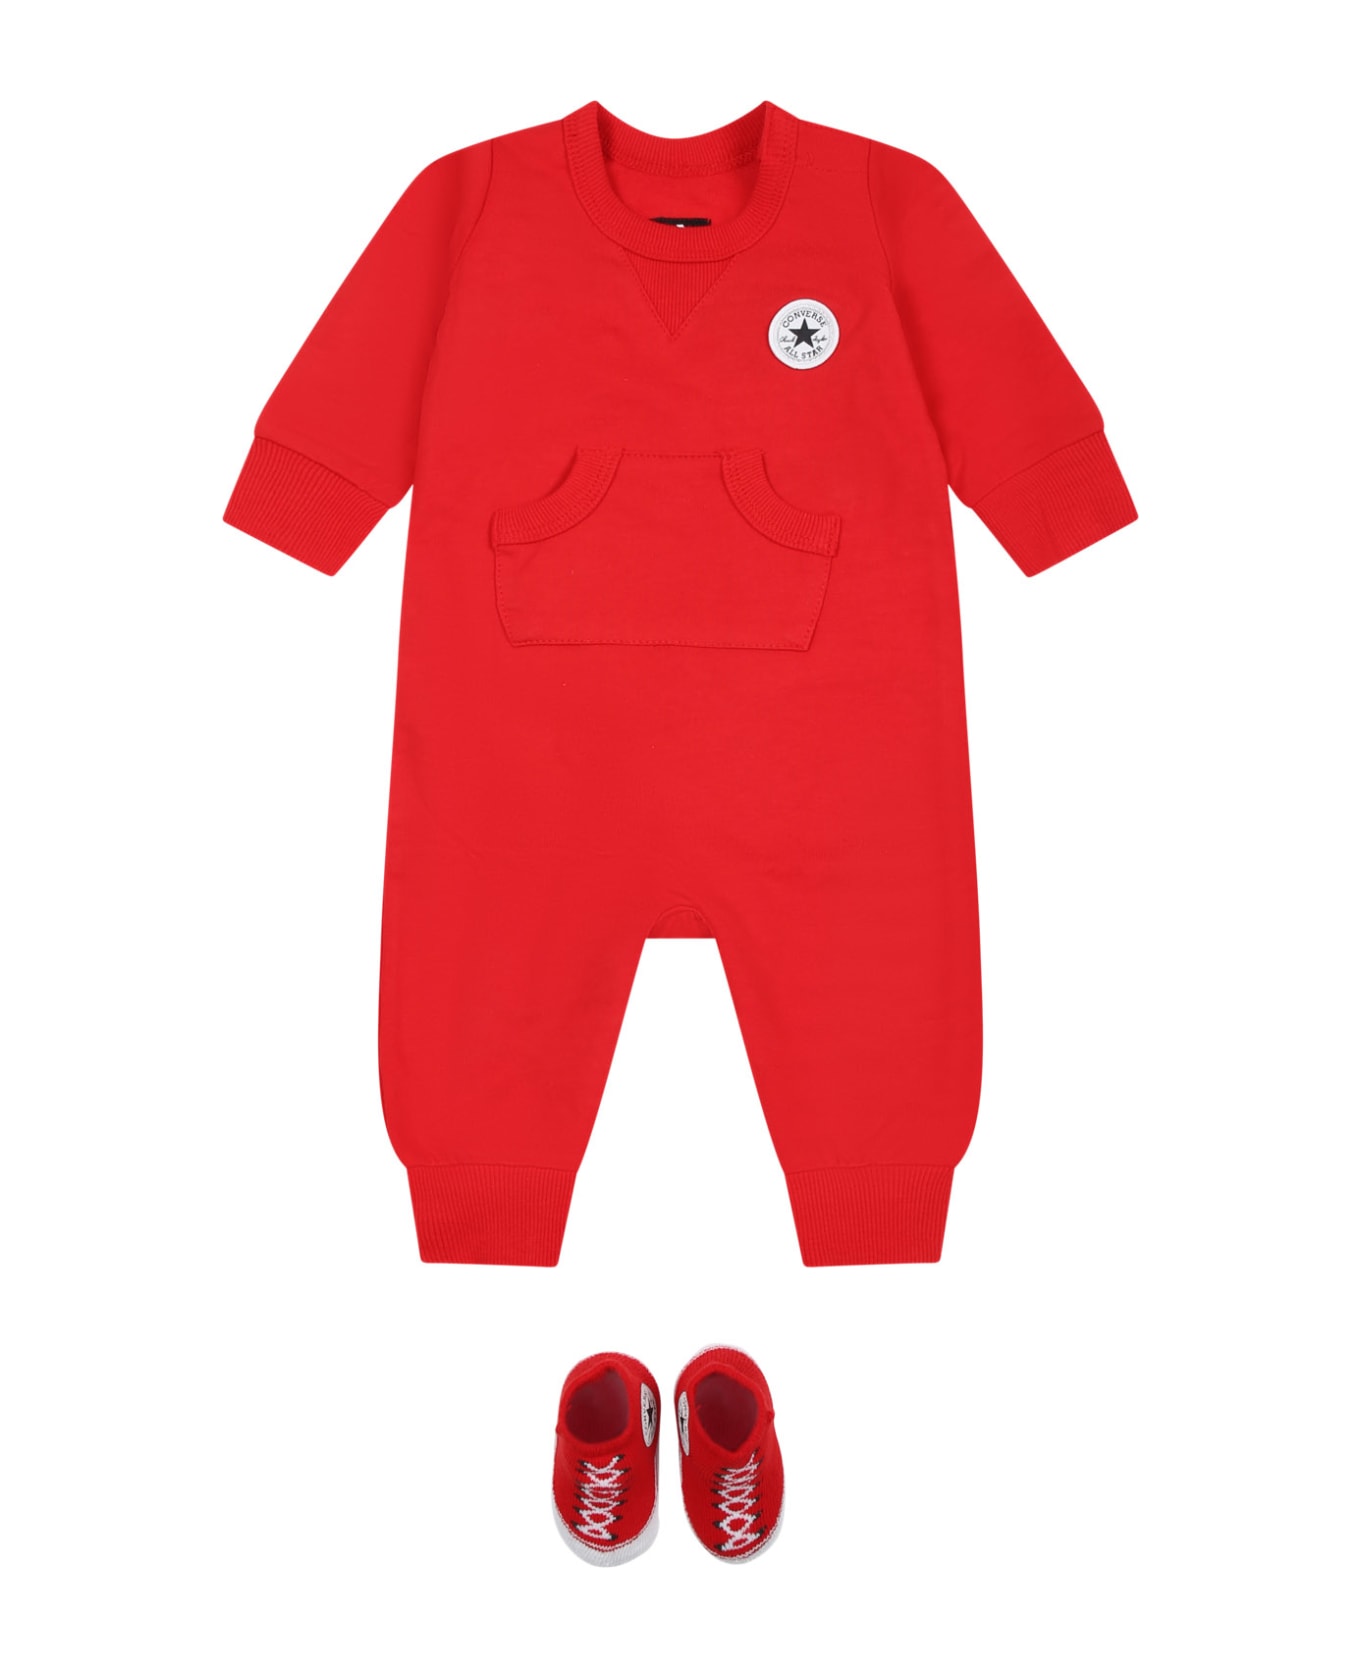 Converse Red Set For Baby Boy With Logo - Red